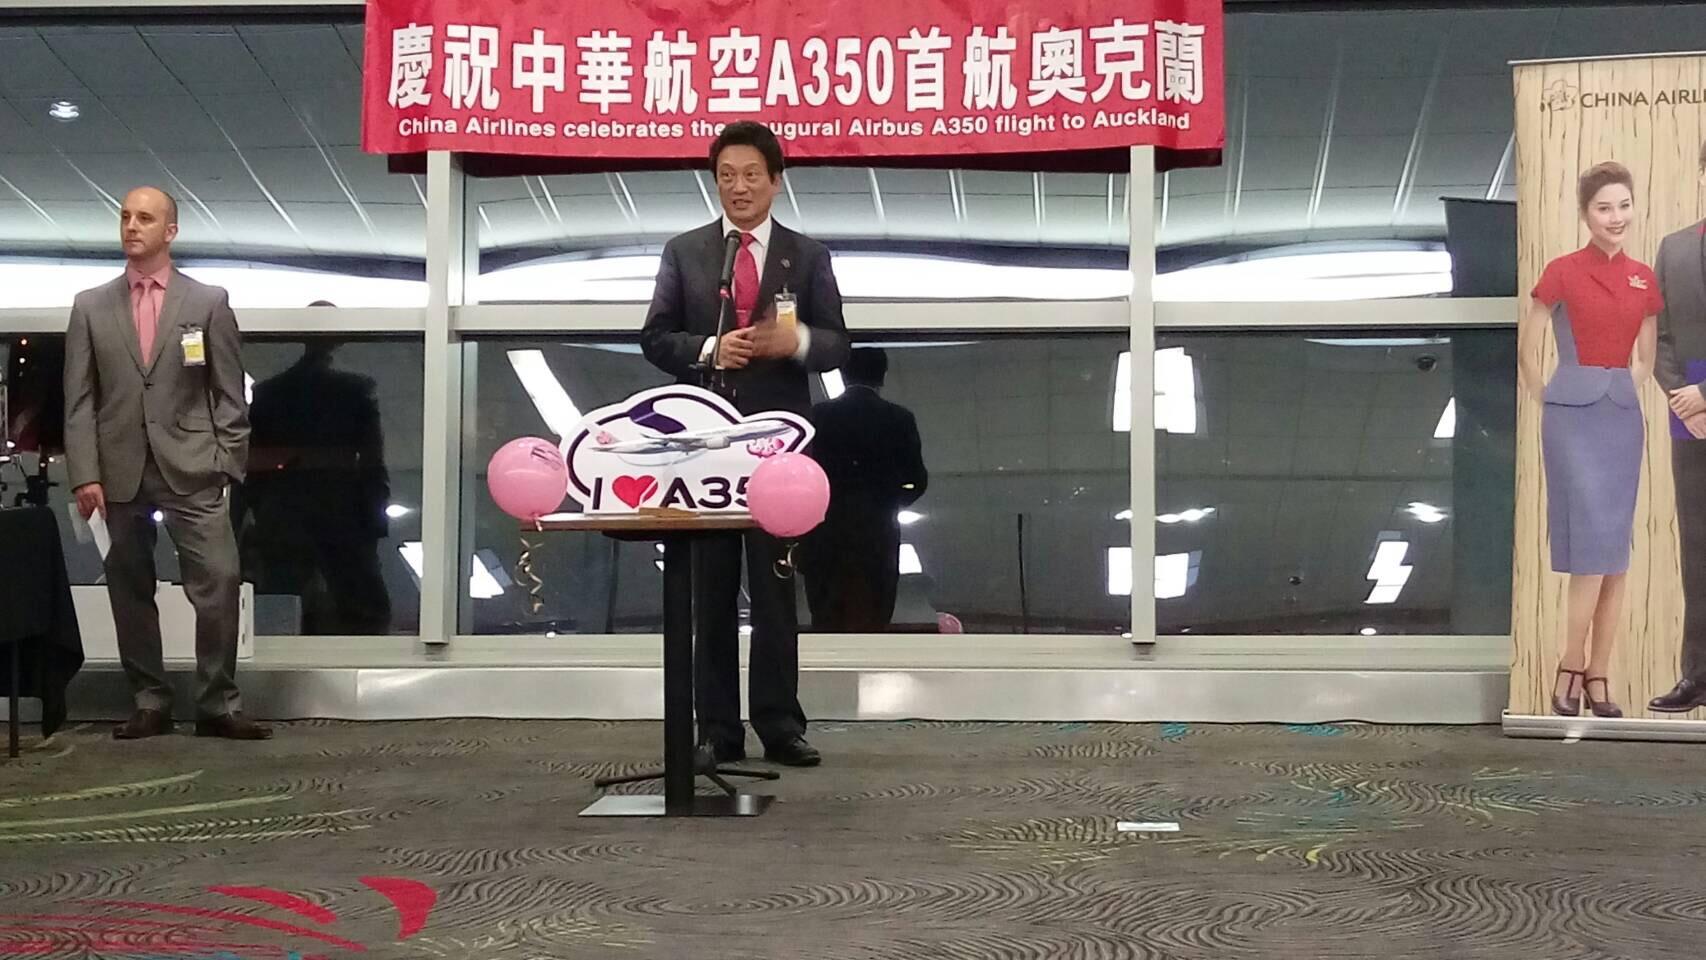 China Airlines A350 (Auckland—Taipei flight) ’s Ribbon Cutting Celebration